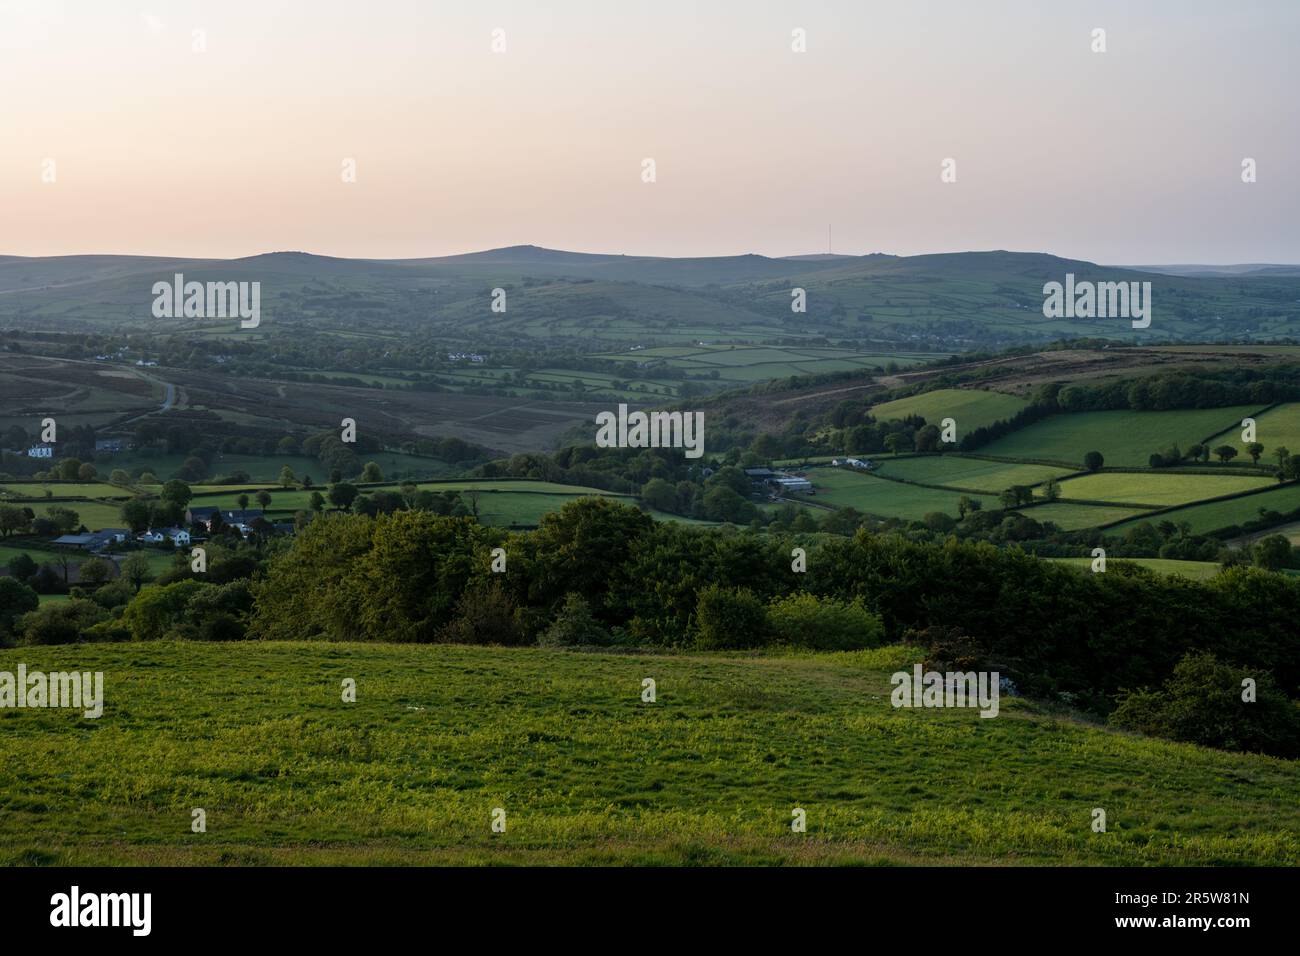 Morning sun shines on the Tavy Valley and the hills of Dartmoor as seen from Brent Tor hill in West Devon. Stock Photo